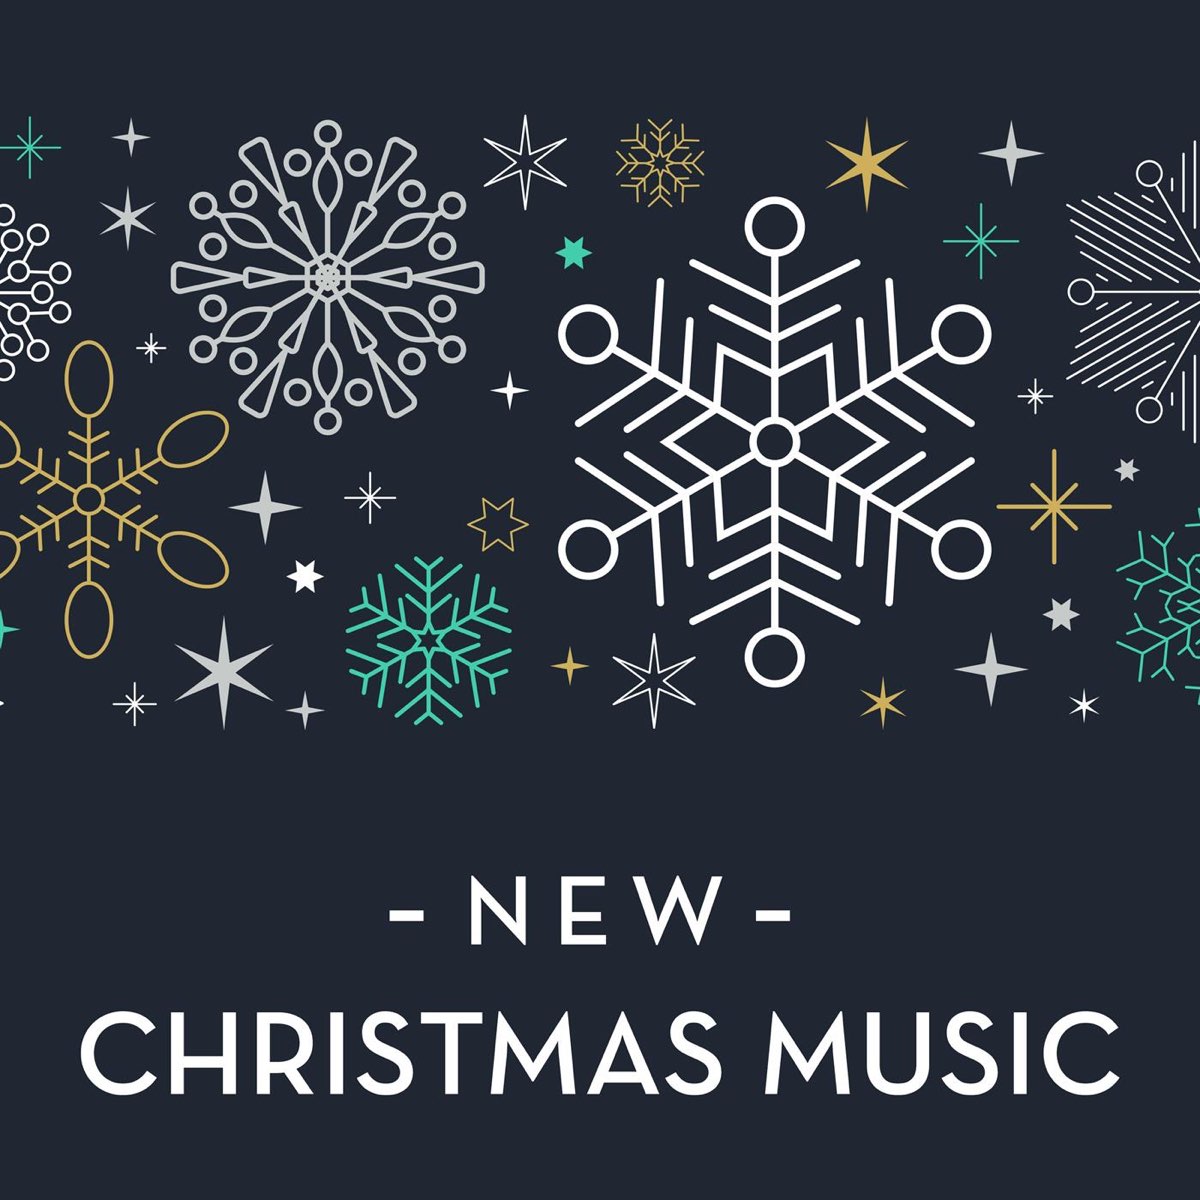 ‎New Christmas Music by Various Artists on Apple Music